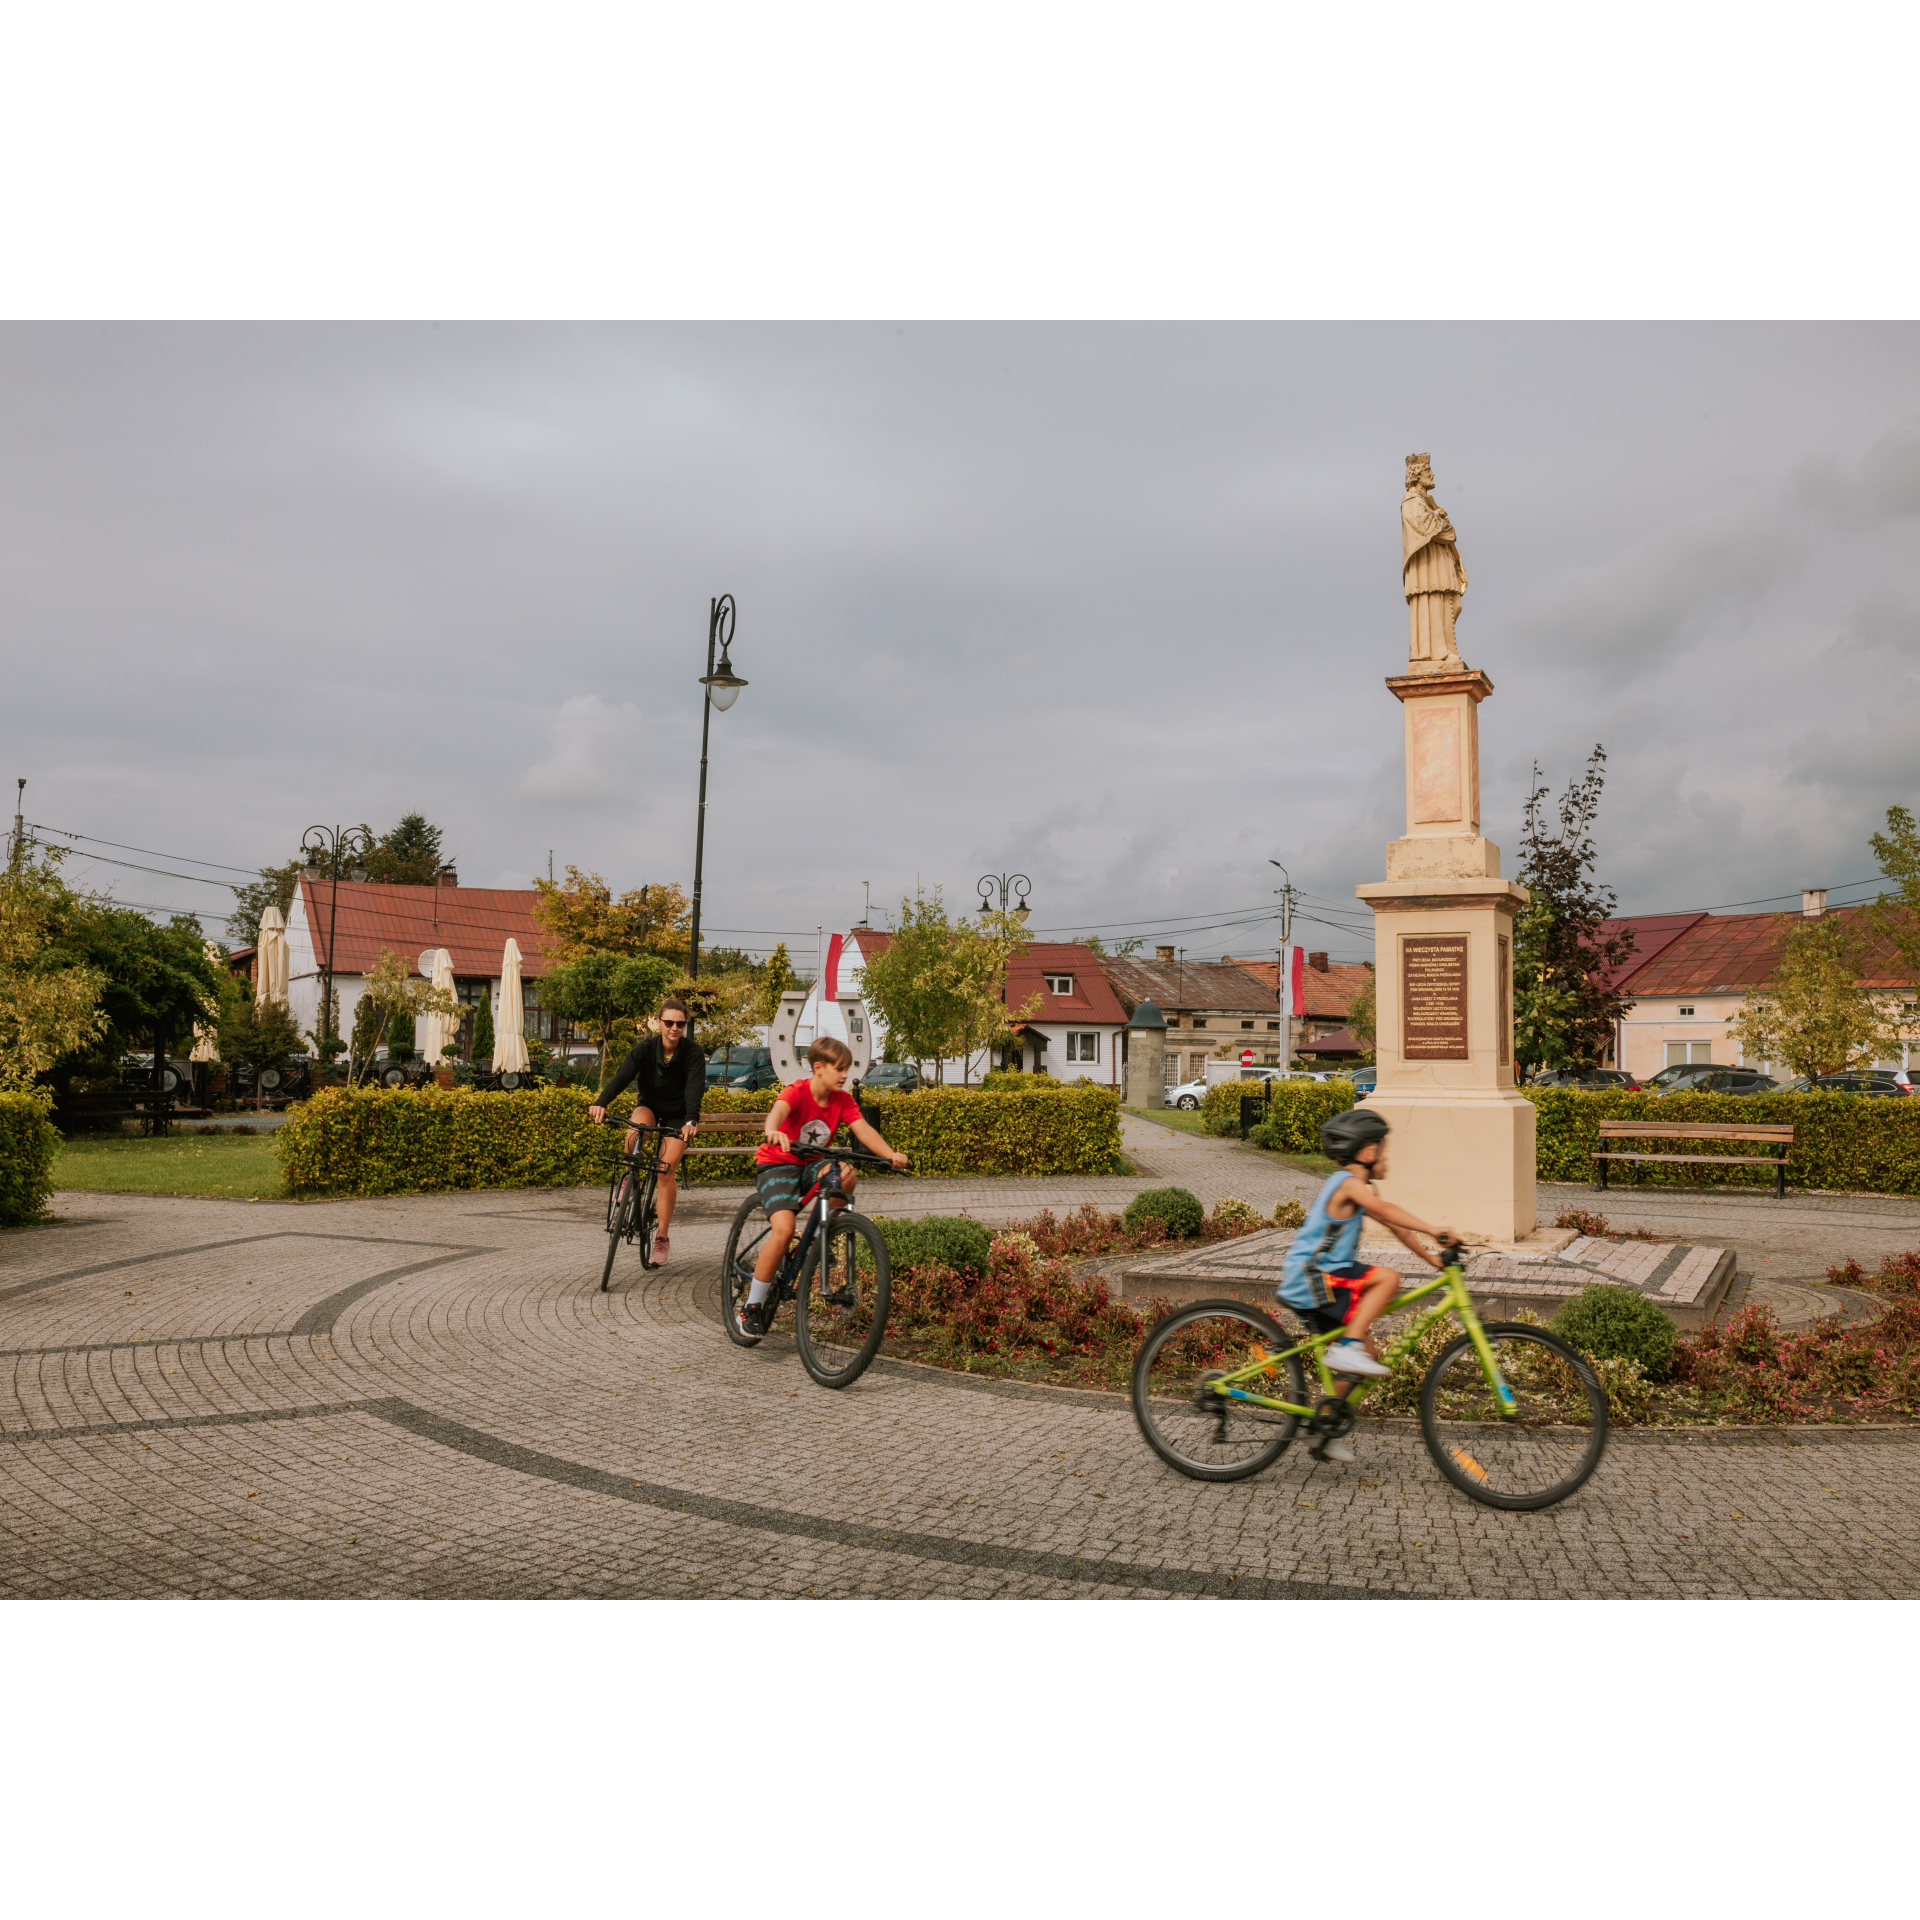 Cyclists on the square with a monument